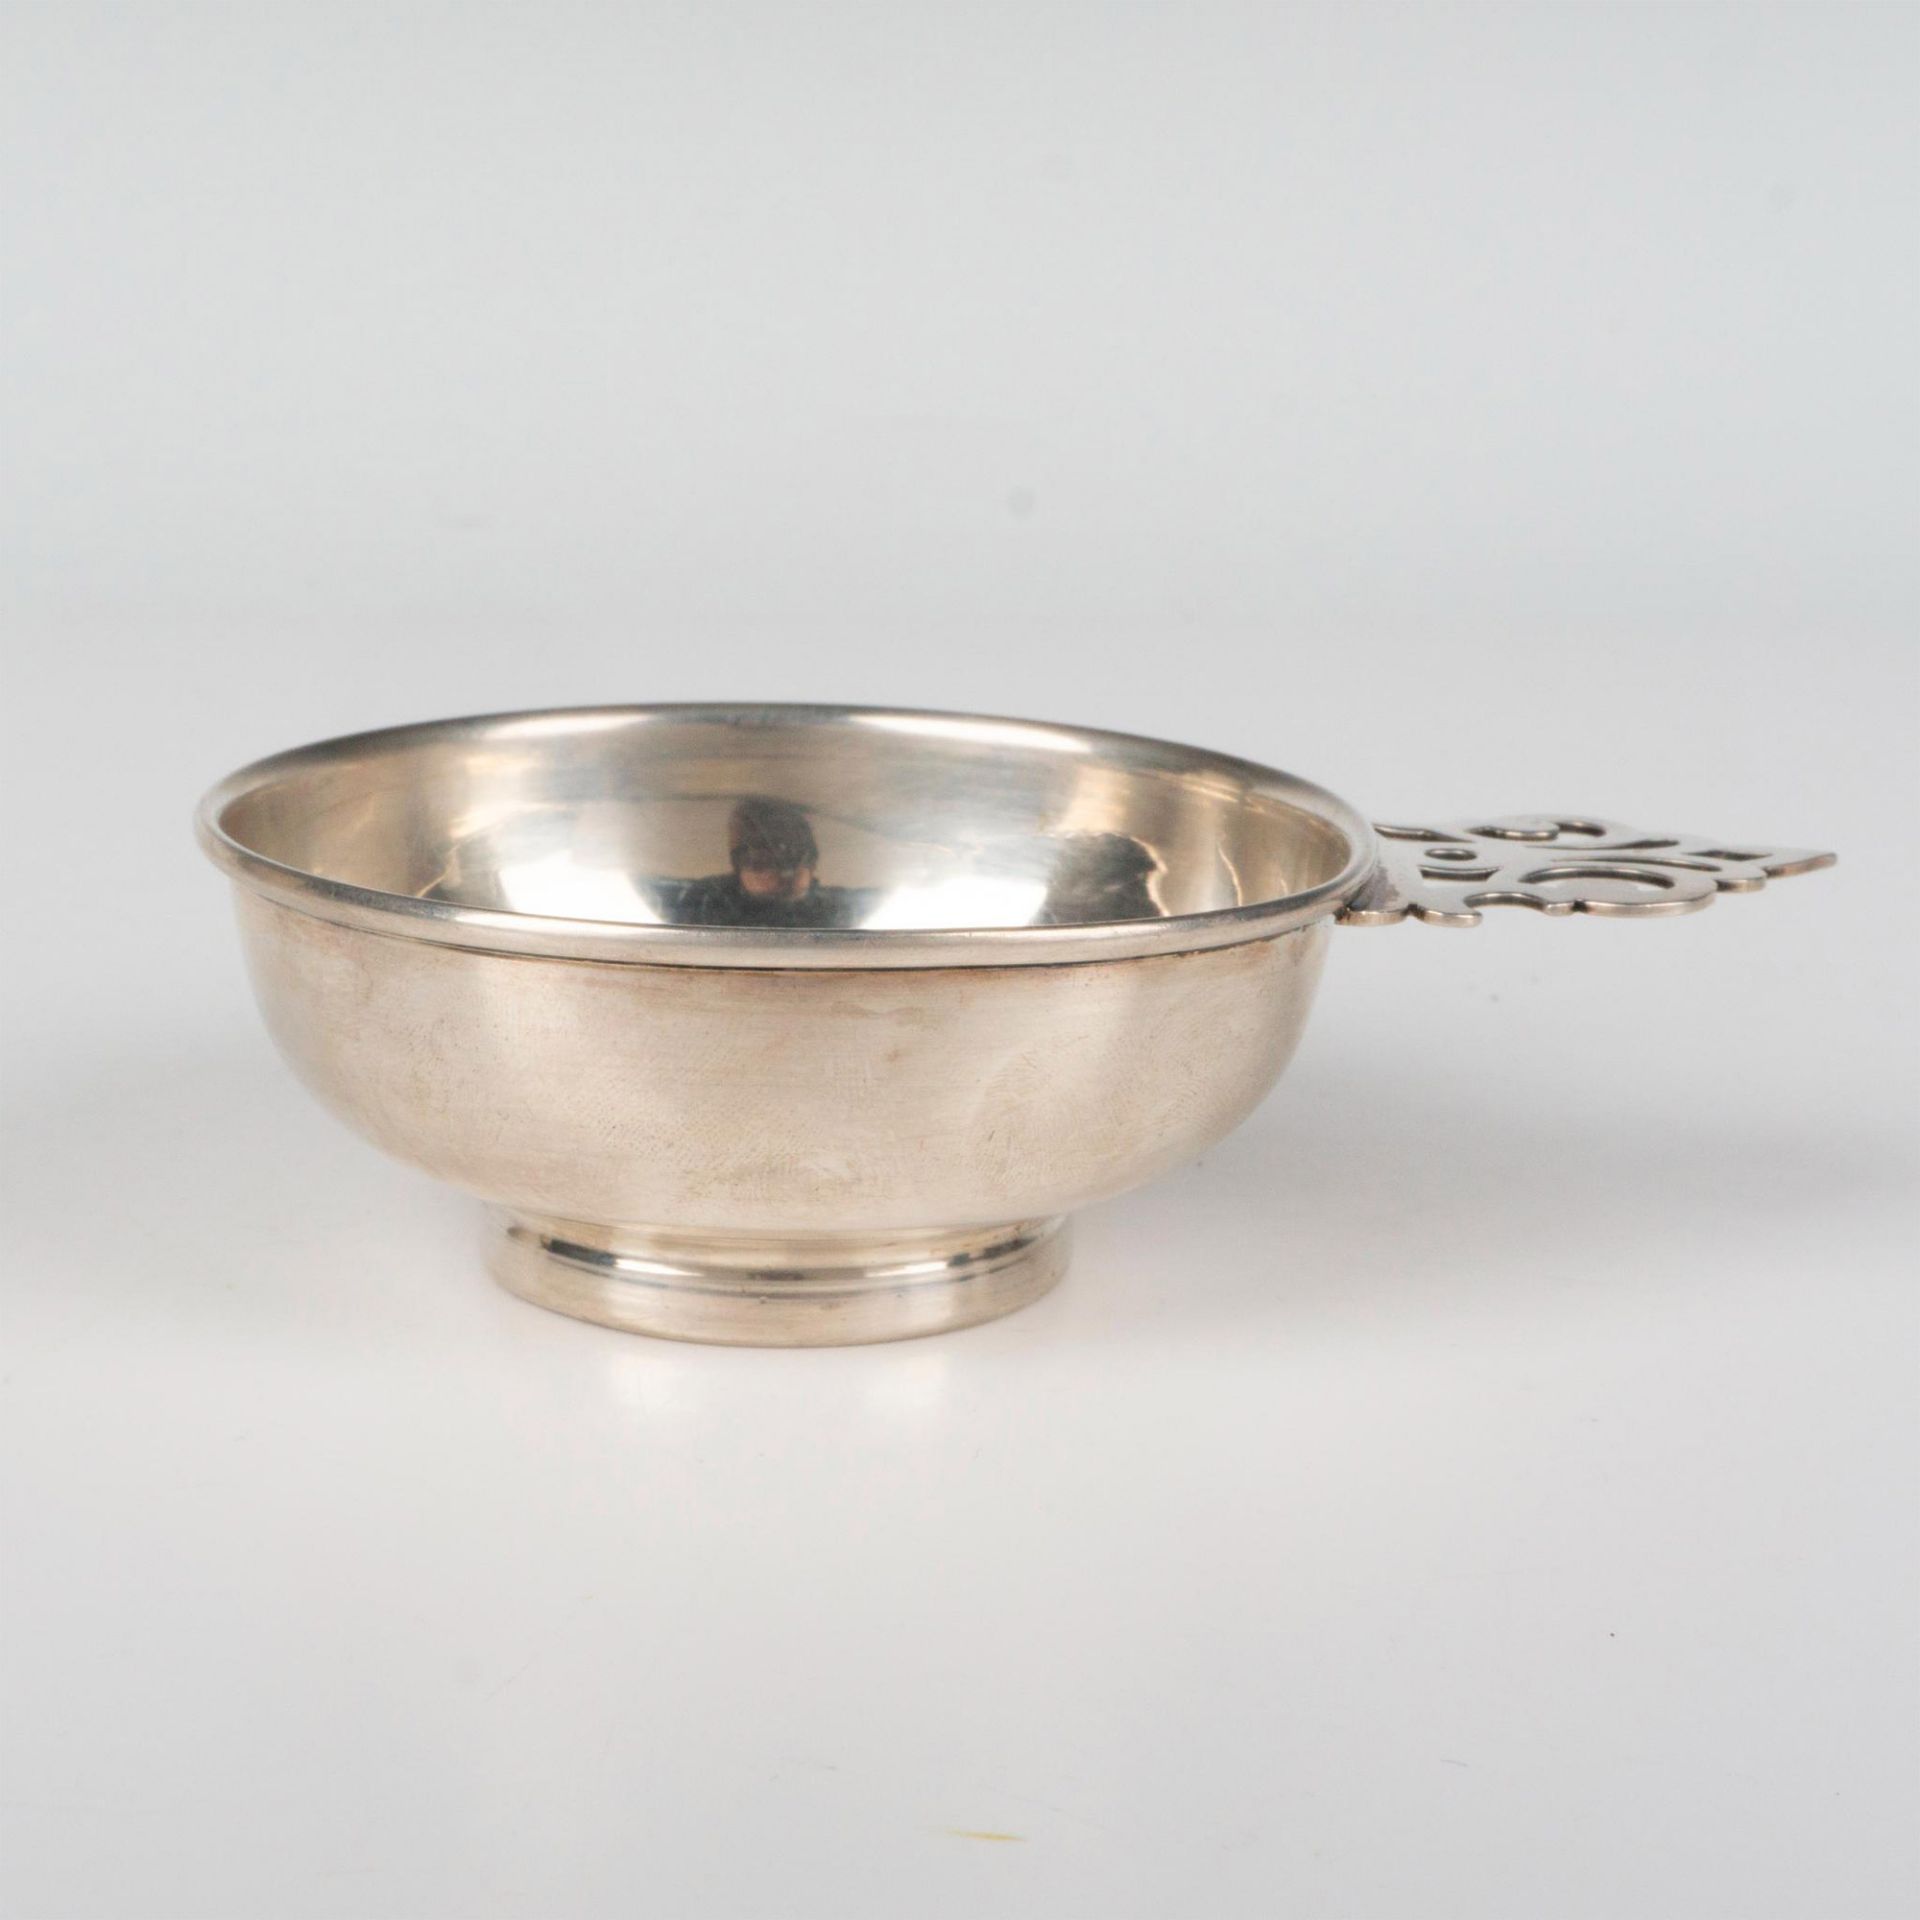 Cartier Sterling Silver Handled Dish with French Medal Base